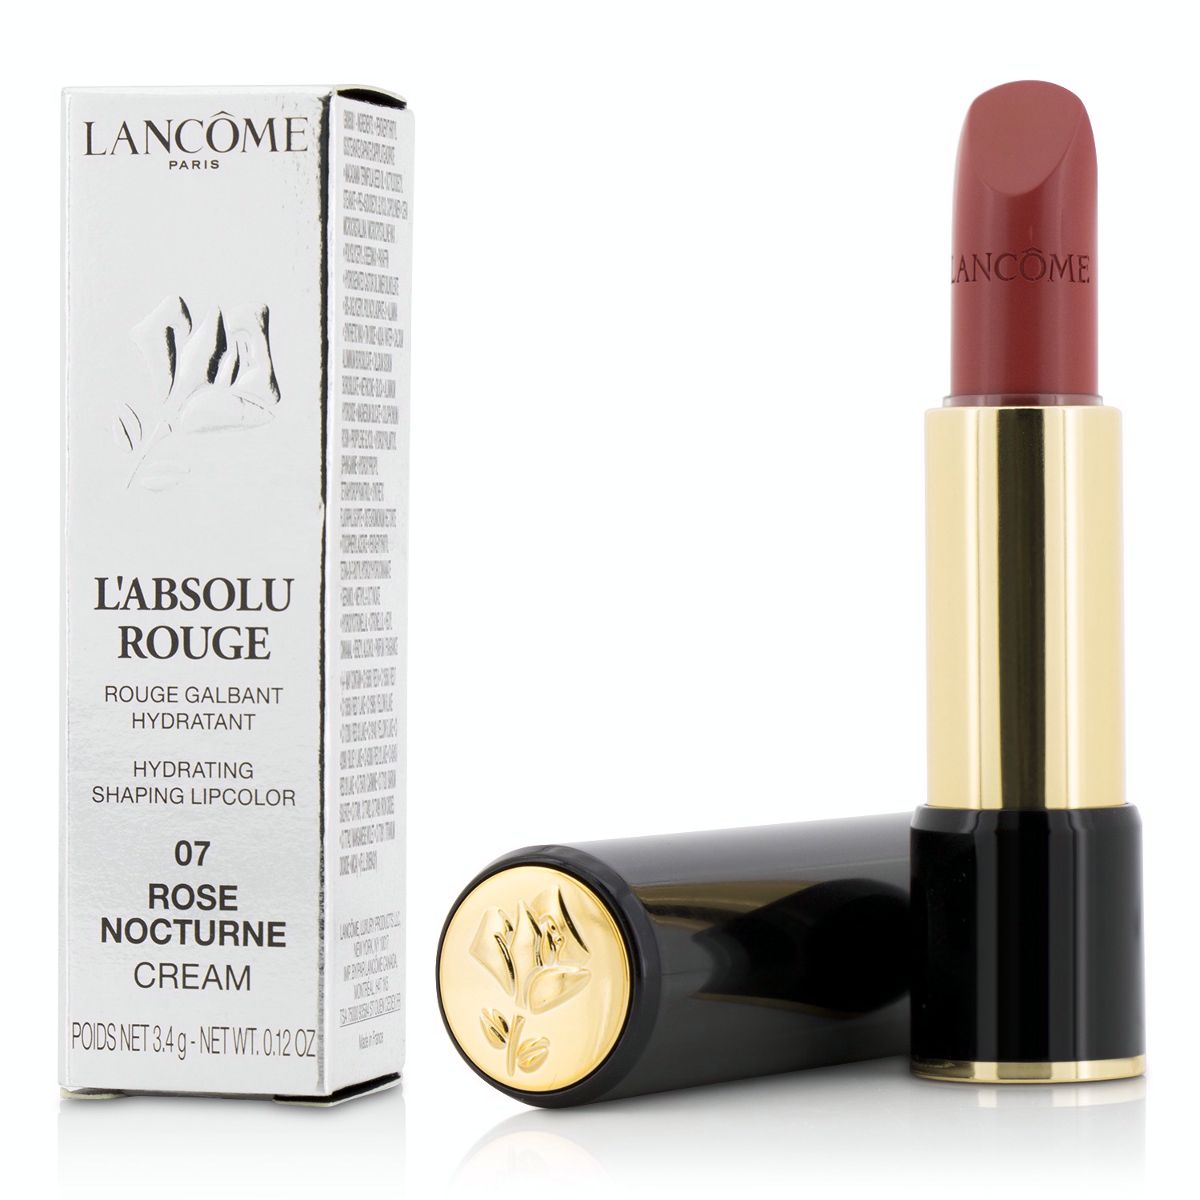 L Absolu Rouge Hydrating Shaping Lipcolor - # 07 Rose Nocturne (Cream) Lancome Image